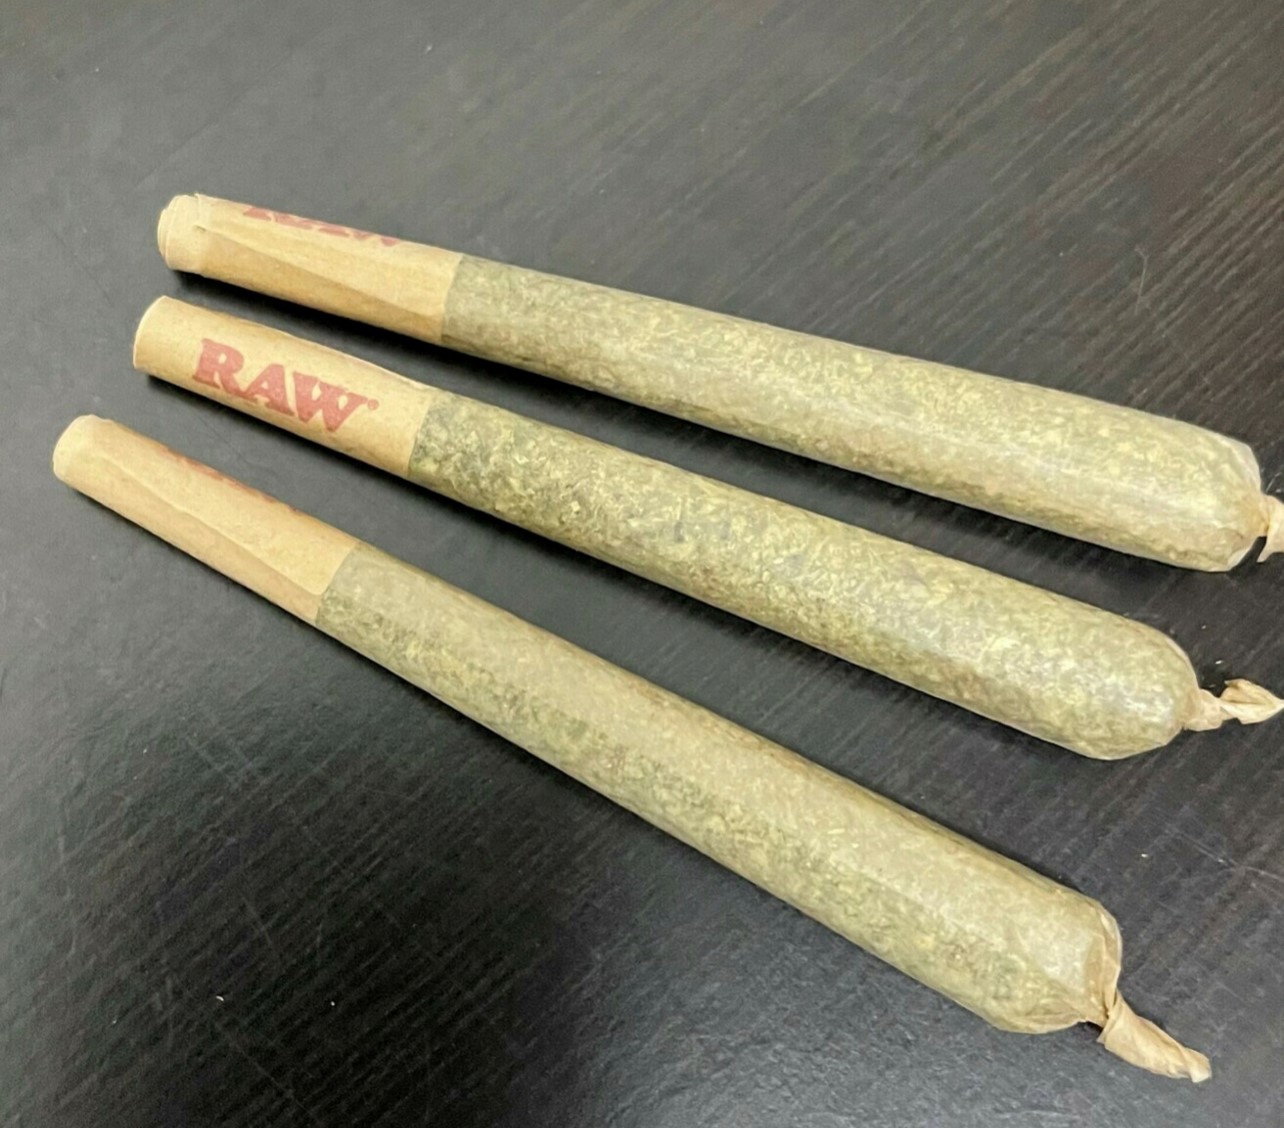 A pre-rolled joint for weed delivery in DC